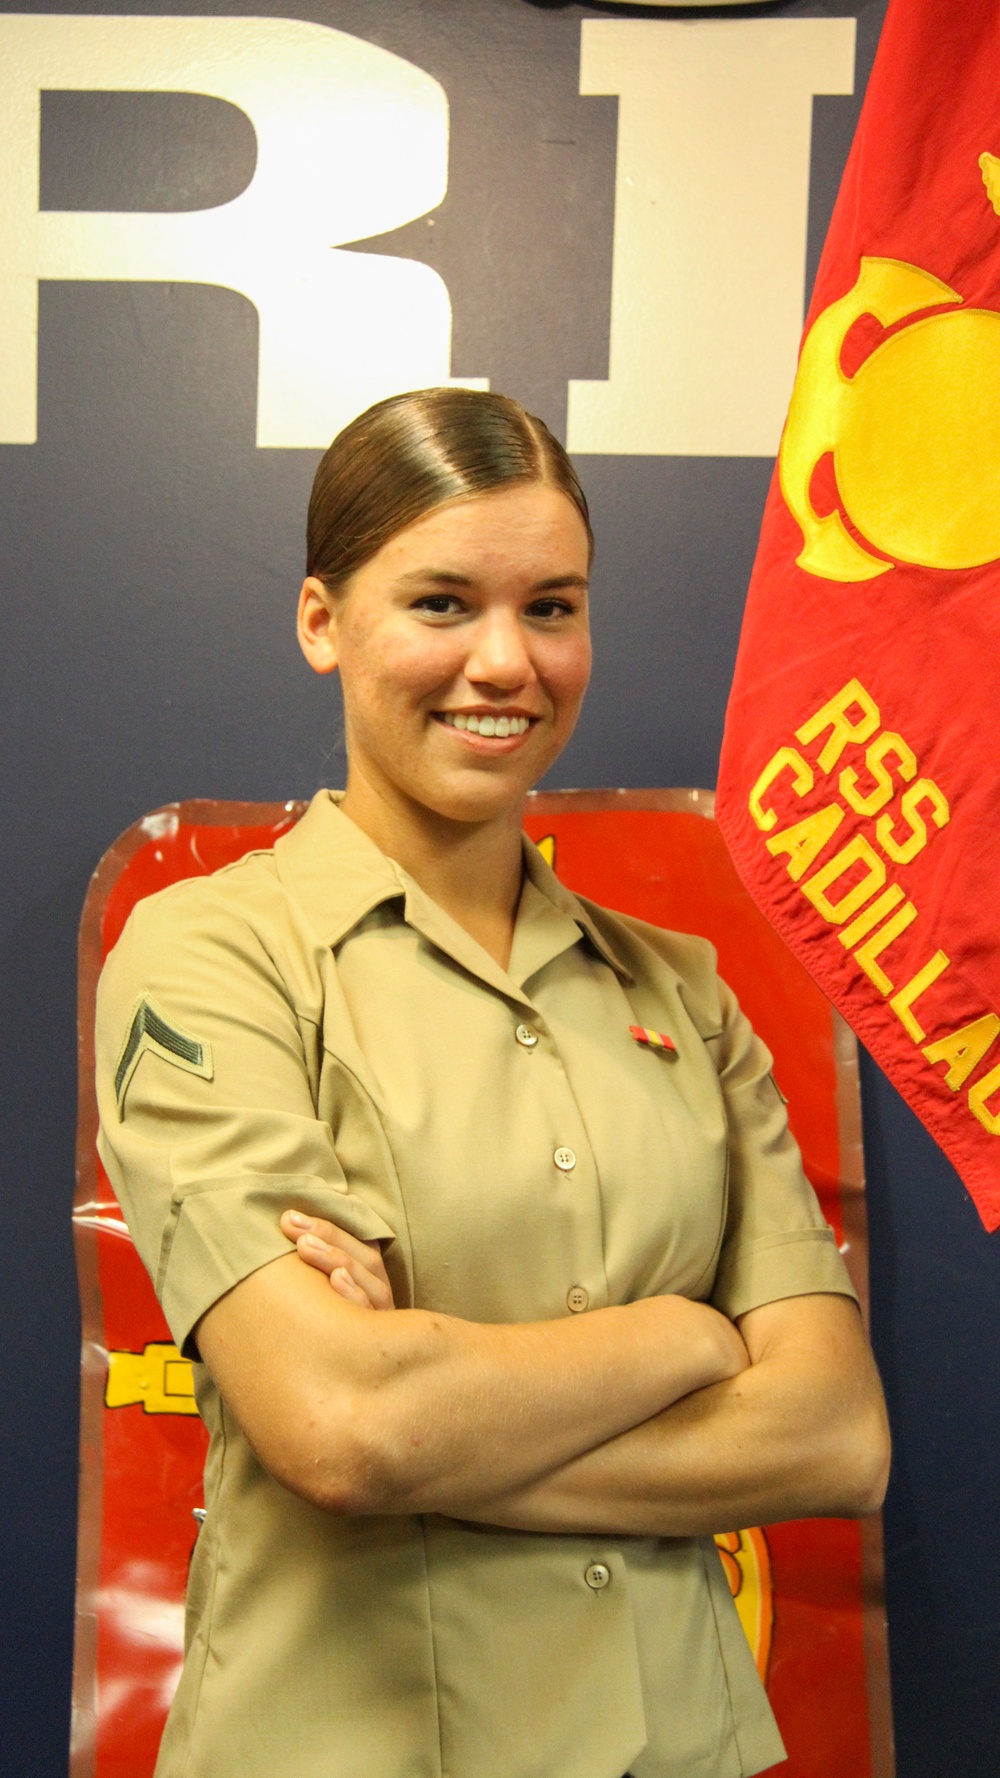 Answering the call: Traverse City native earns the title United States Marine